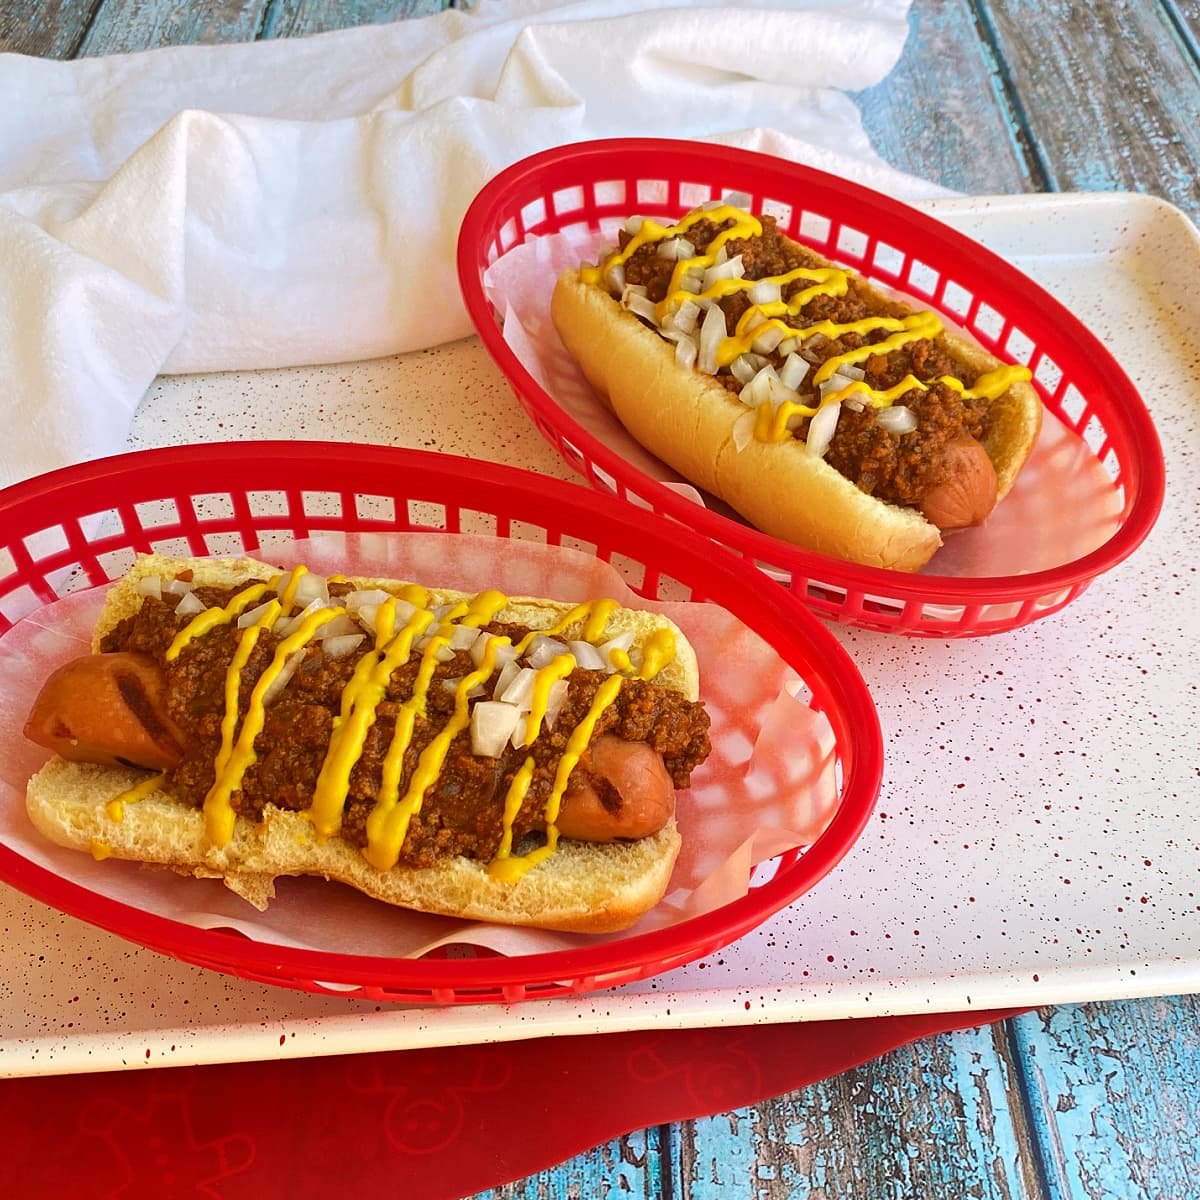 Two Coney Island hotdogs garnished with onions and yellow mustard, in red plastic fast food baskets. 